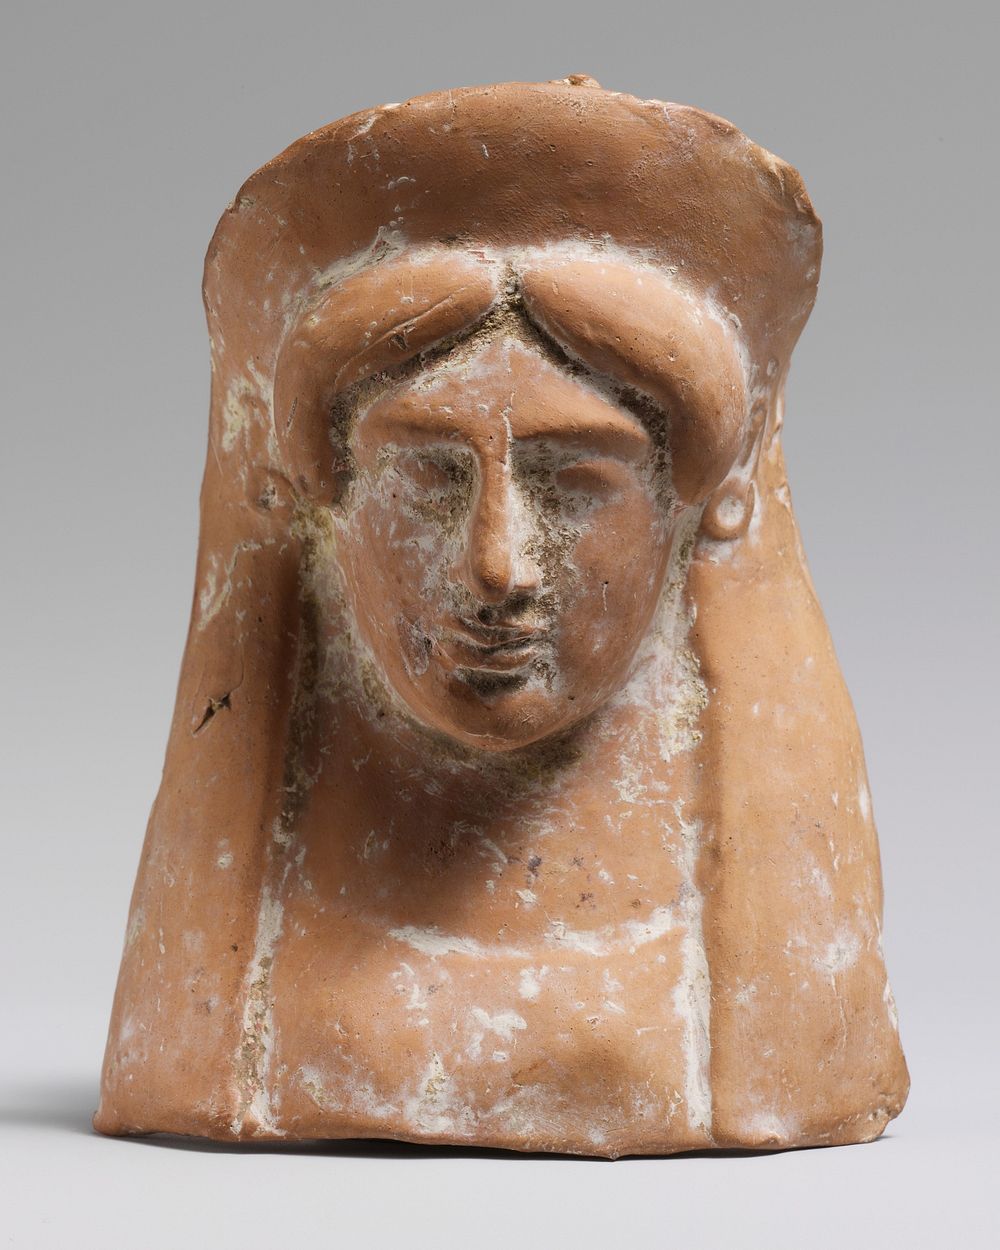 Terracotta relief with the head and neck of a woman